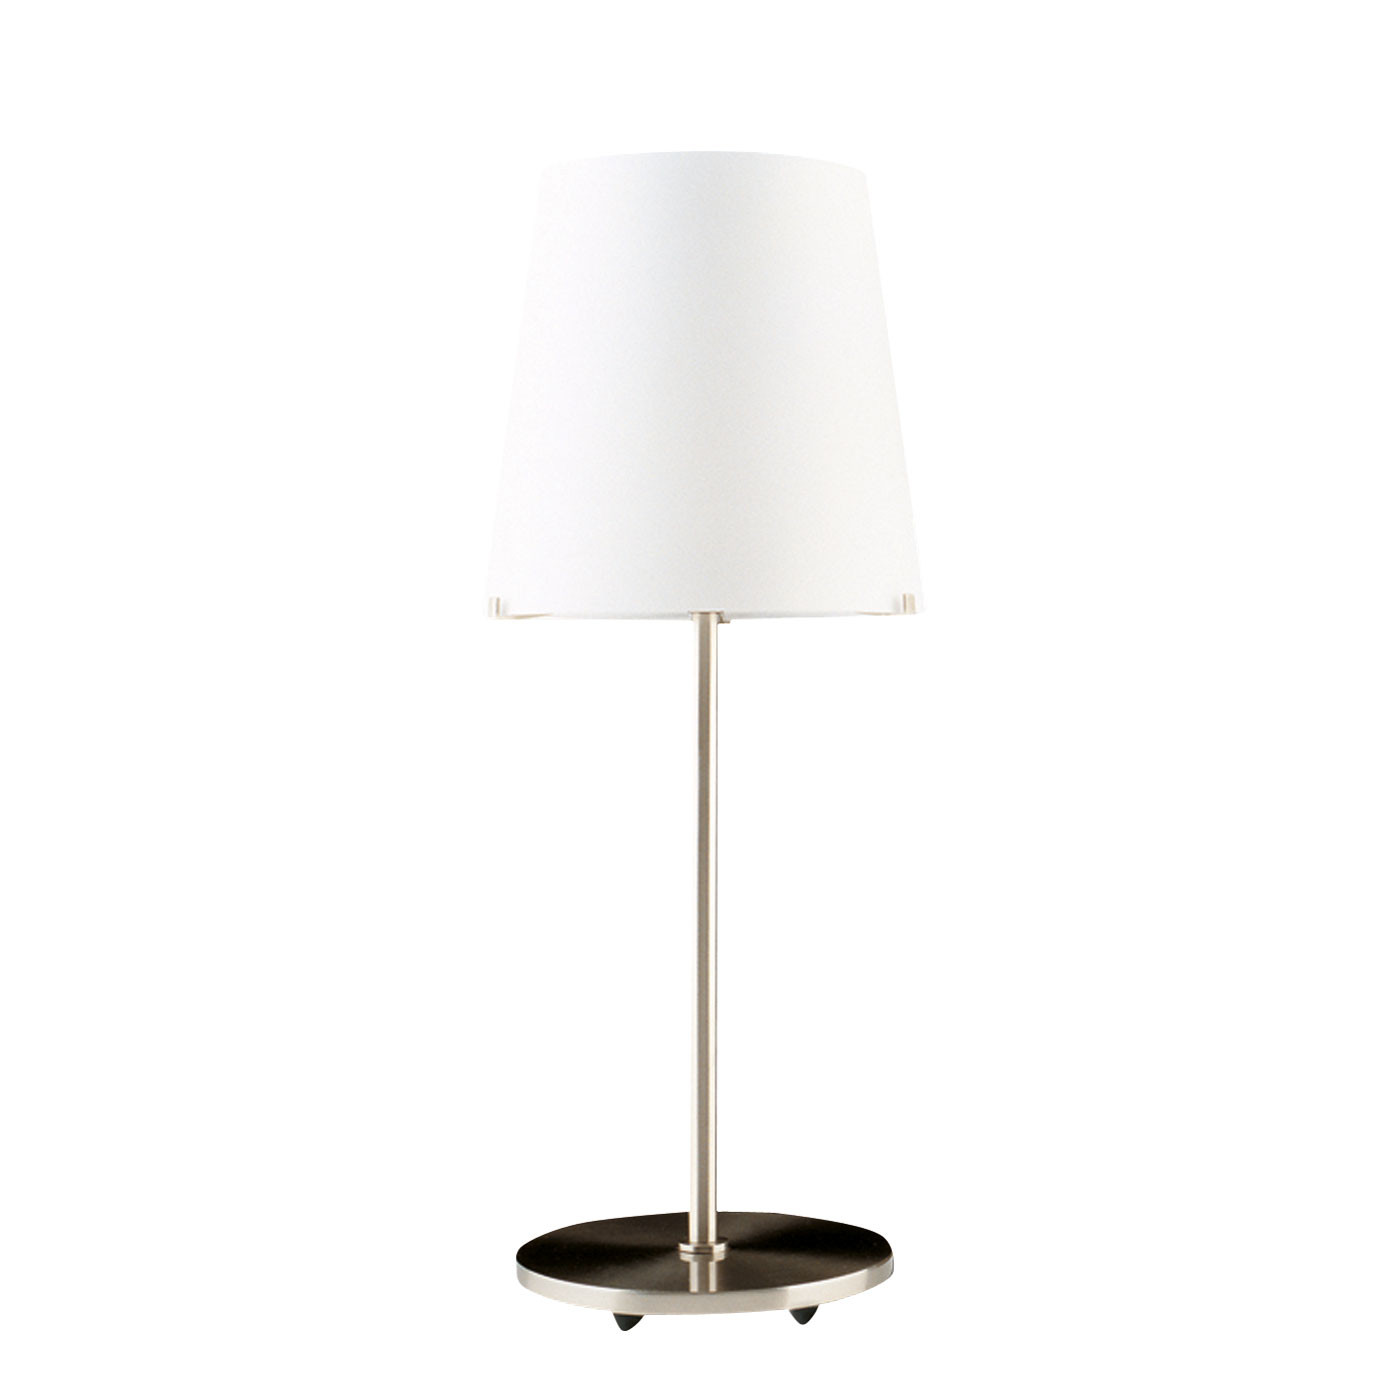 Fontanaarte 3247 Table Lamp At Nostraforma, Contemporary Glass Table Lamps Uk